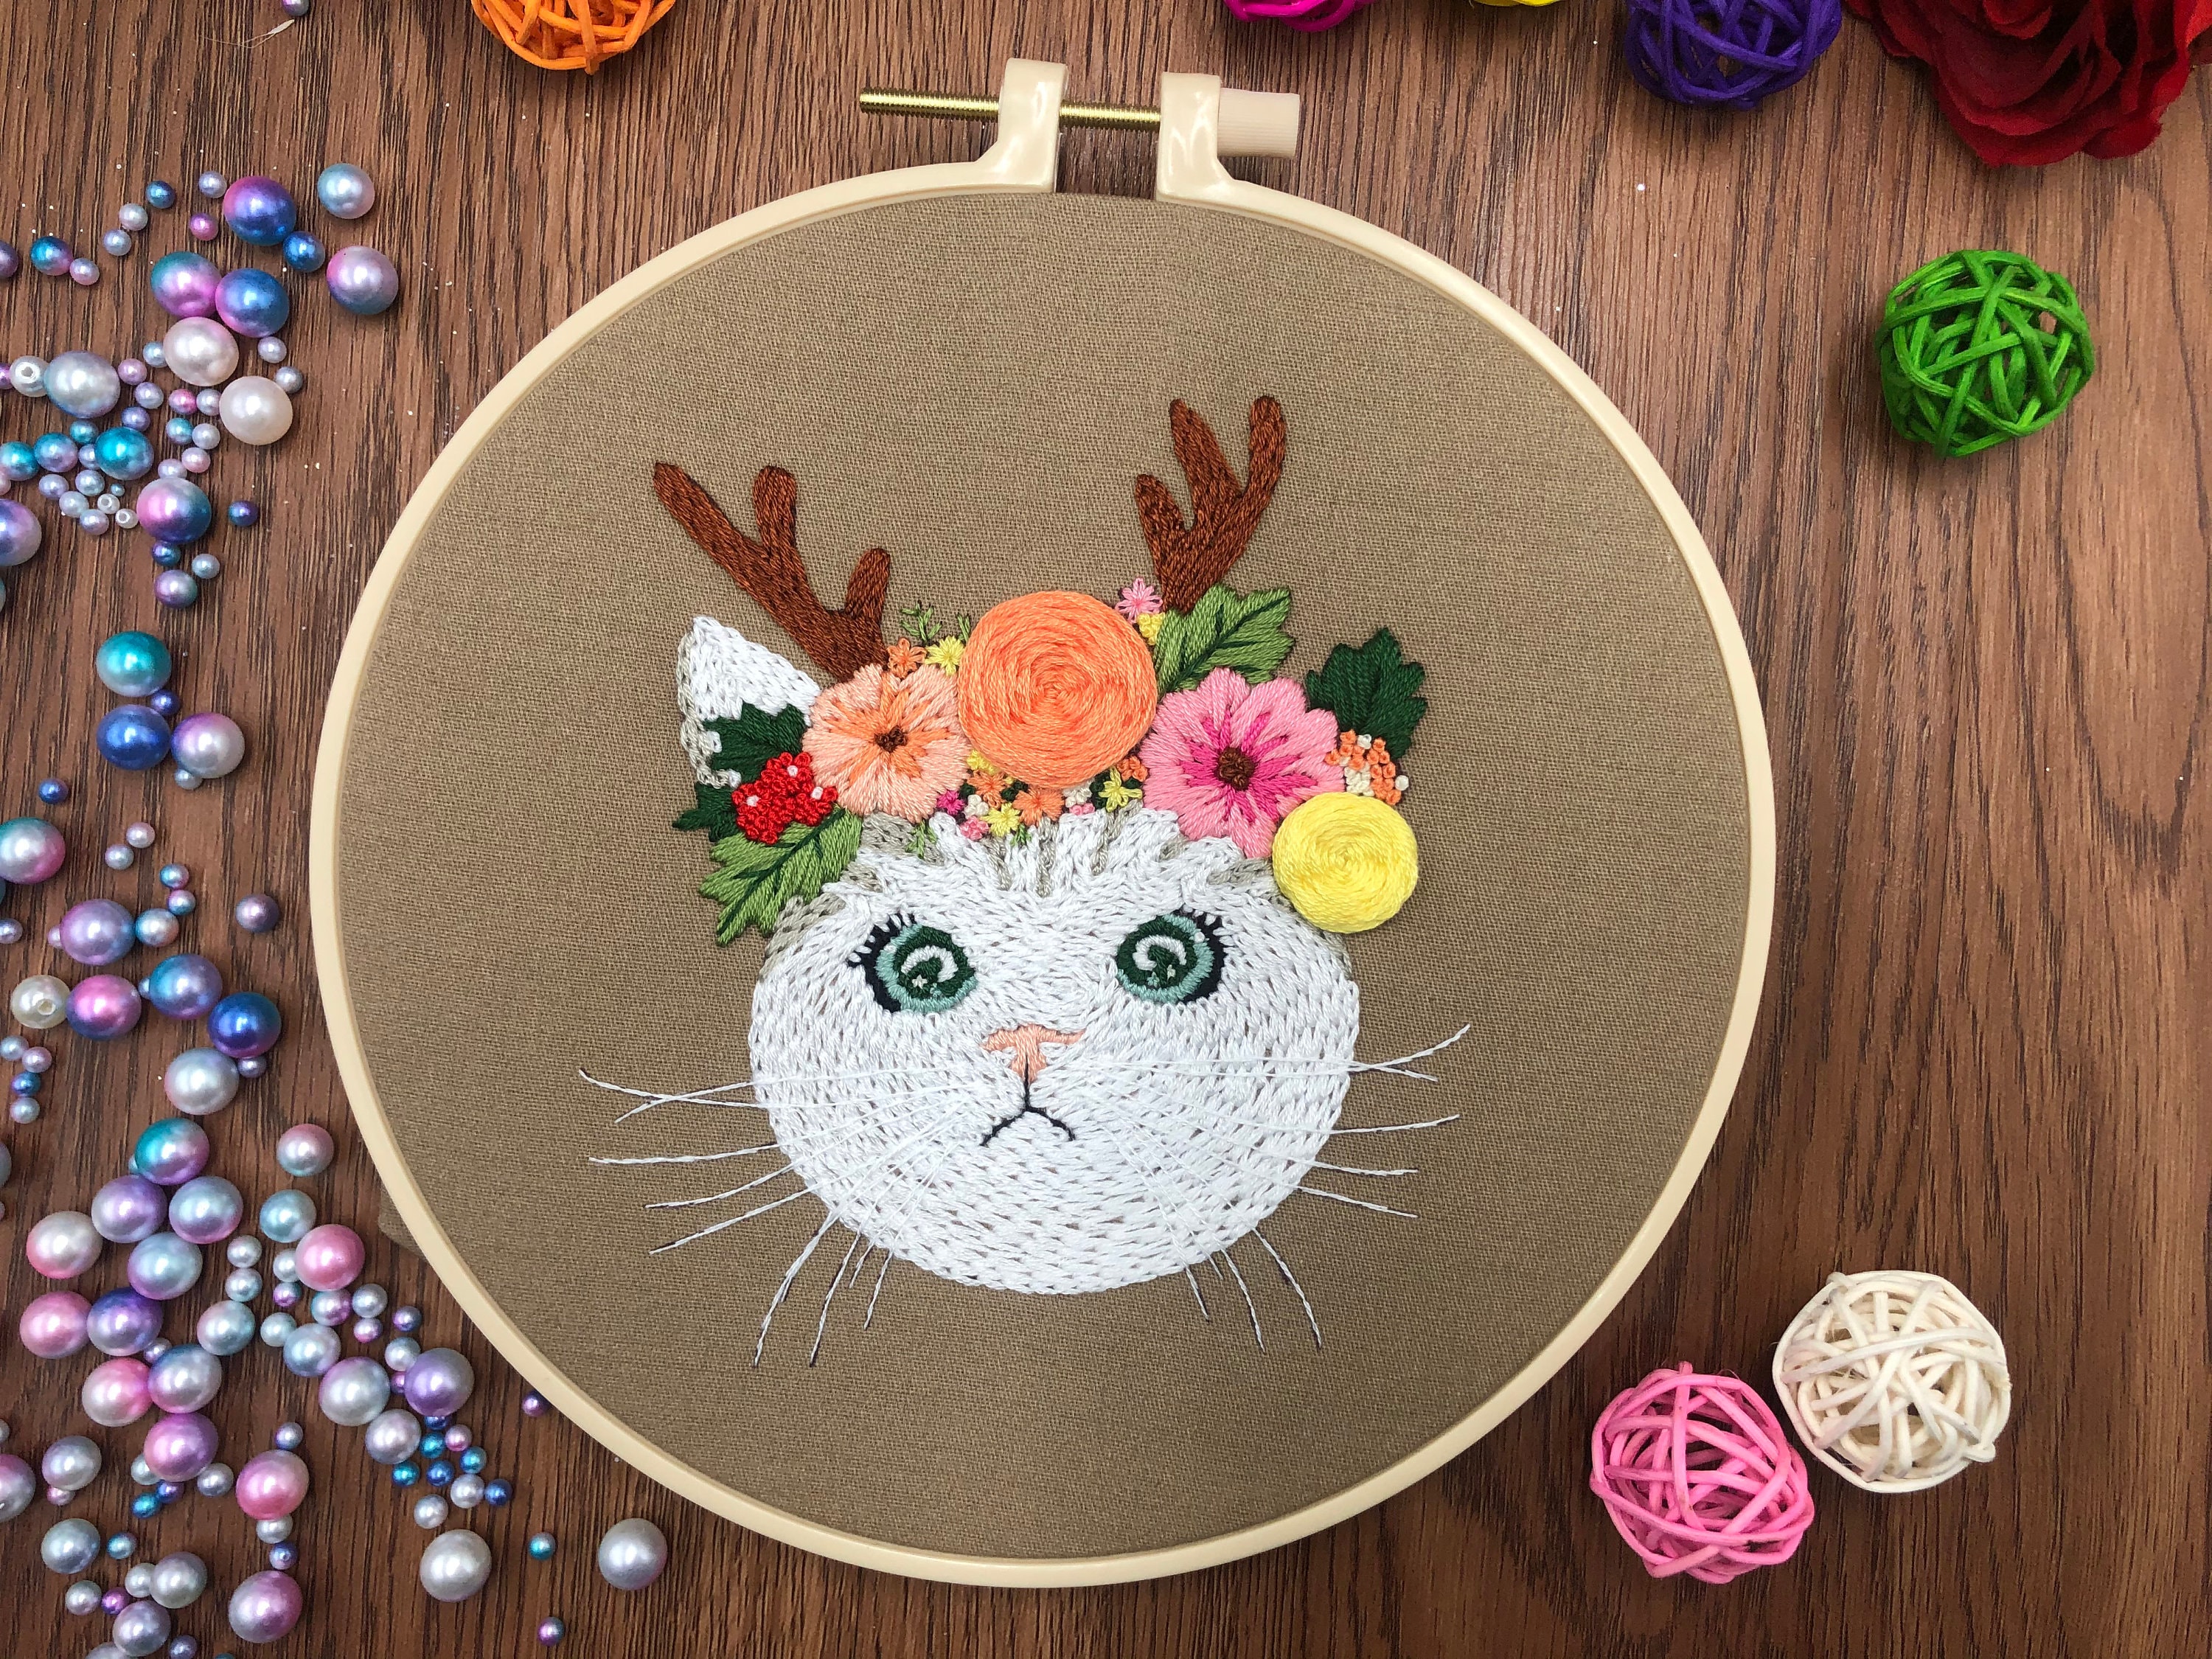 Sassy Cat Crewel Embroidery Kit - Needlework Projects, Tools & Accessories